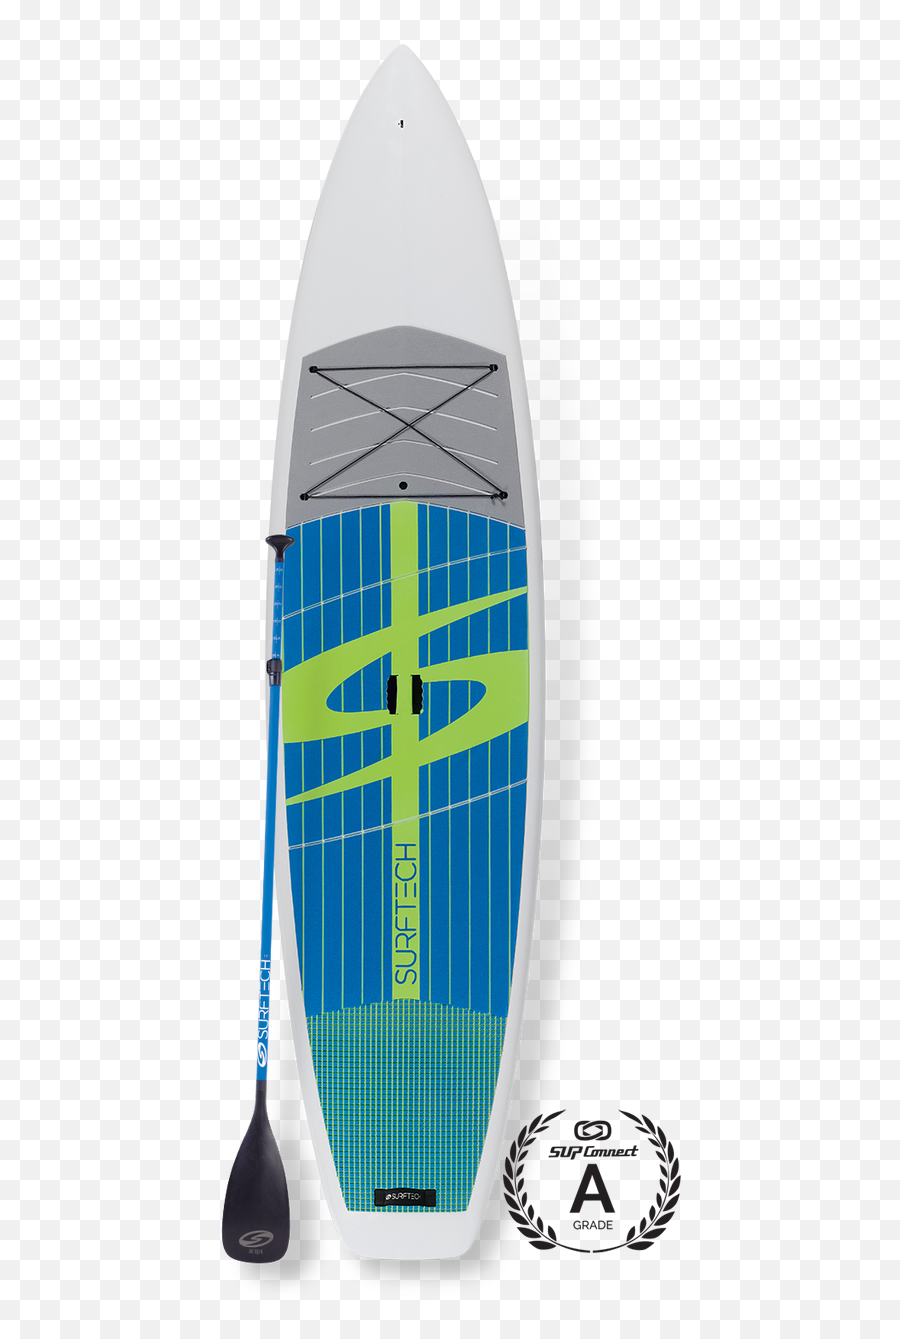 Surftech - Surftech Paddle Boards Emoji,What Does The Japanese Emoticon Called Oars